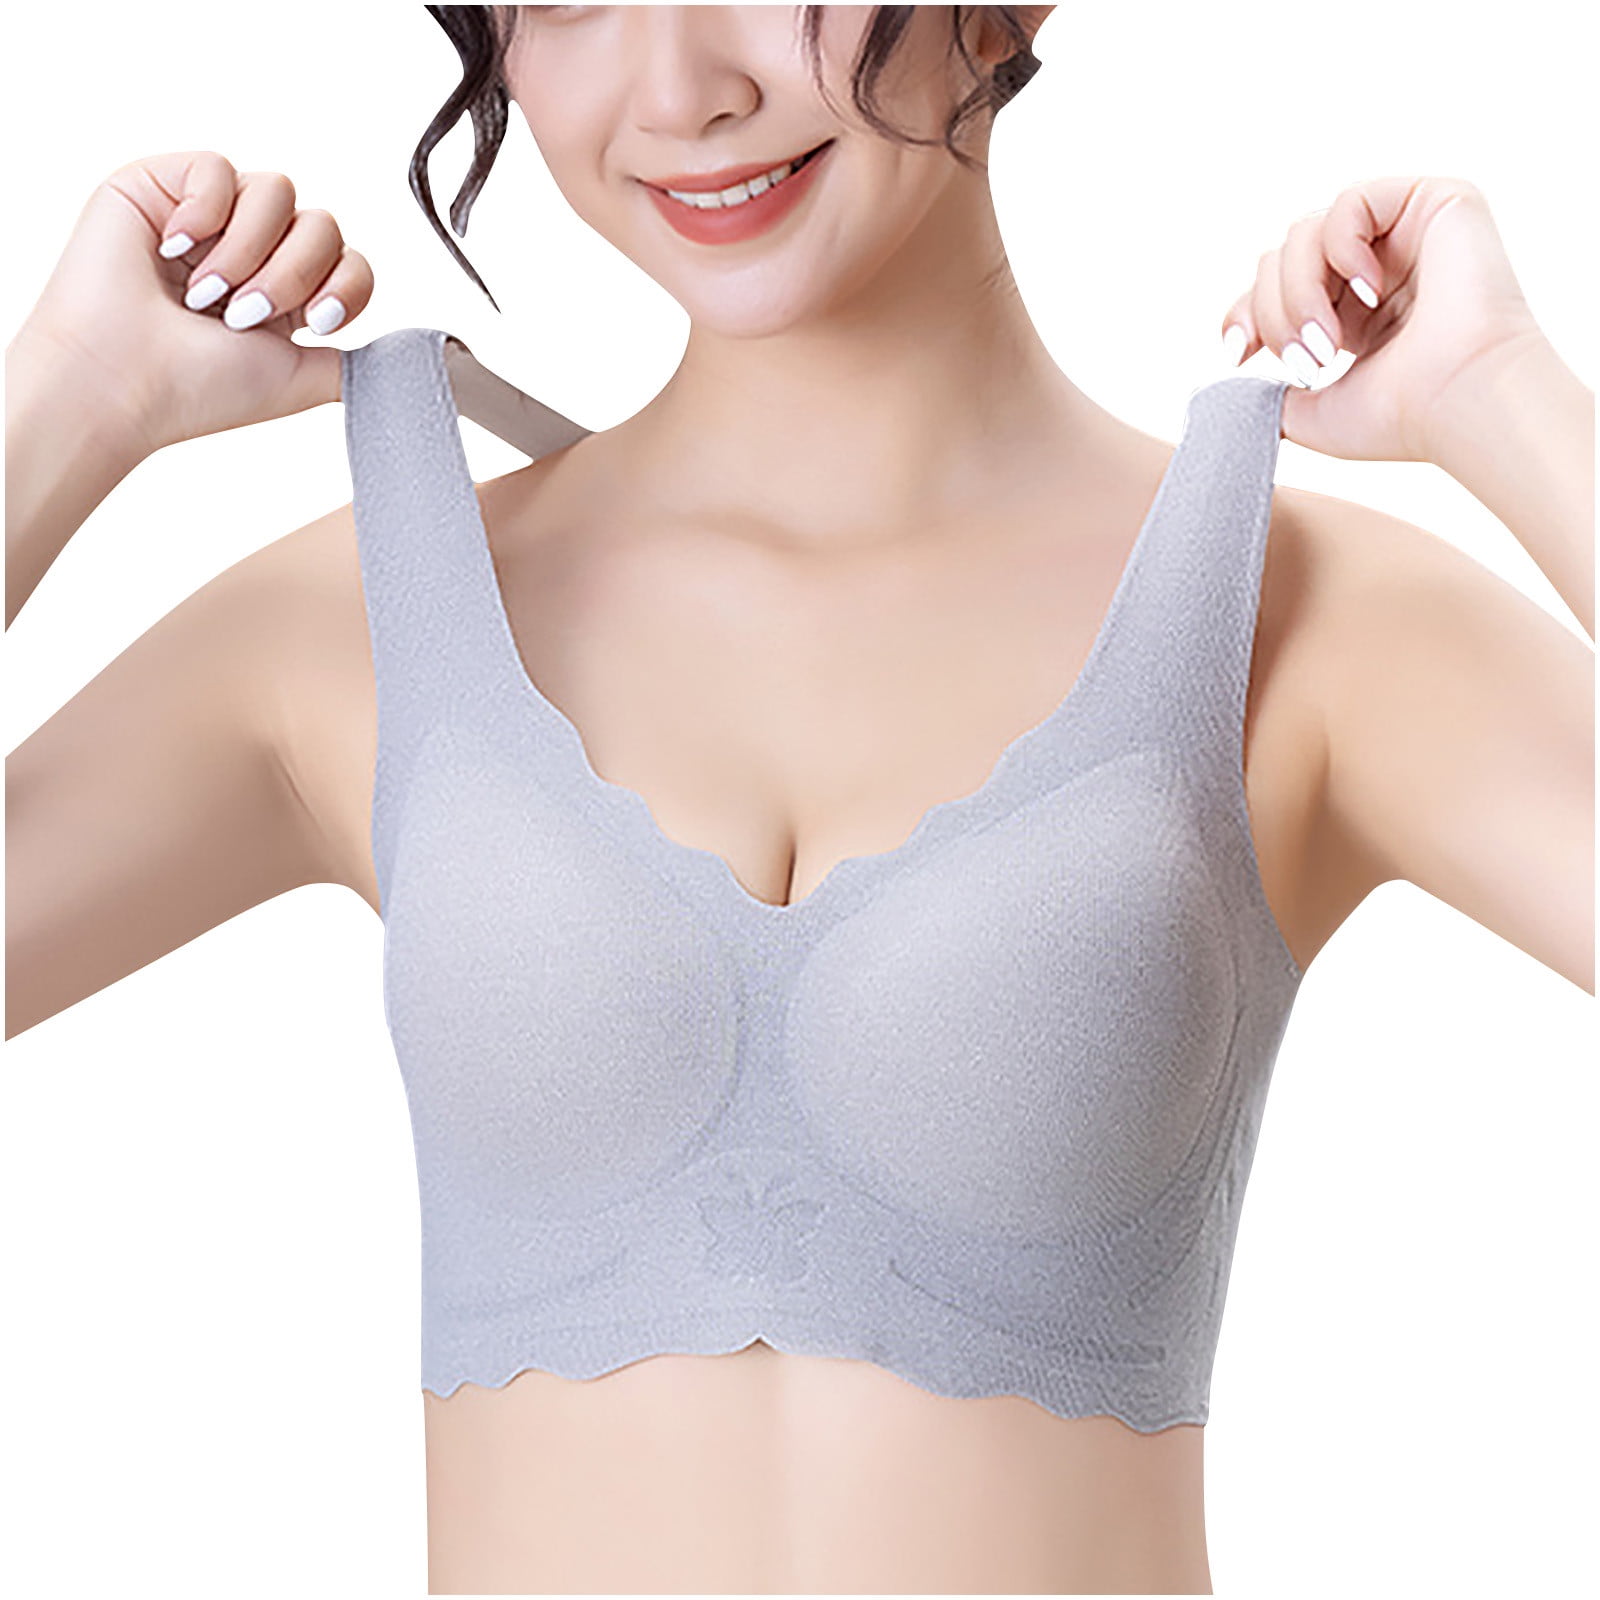 Mrat Clearance Front Closure Bras for Women Large Padded Underwear